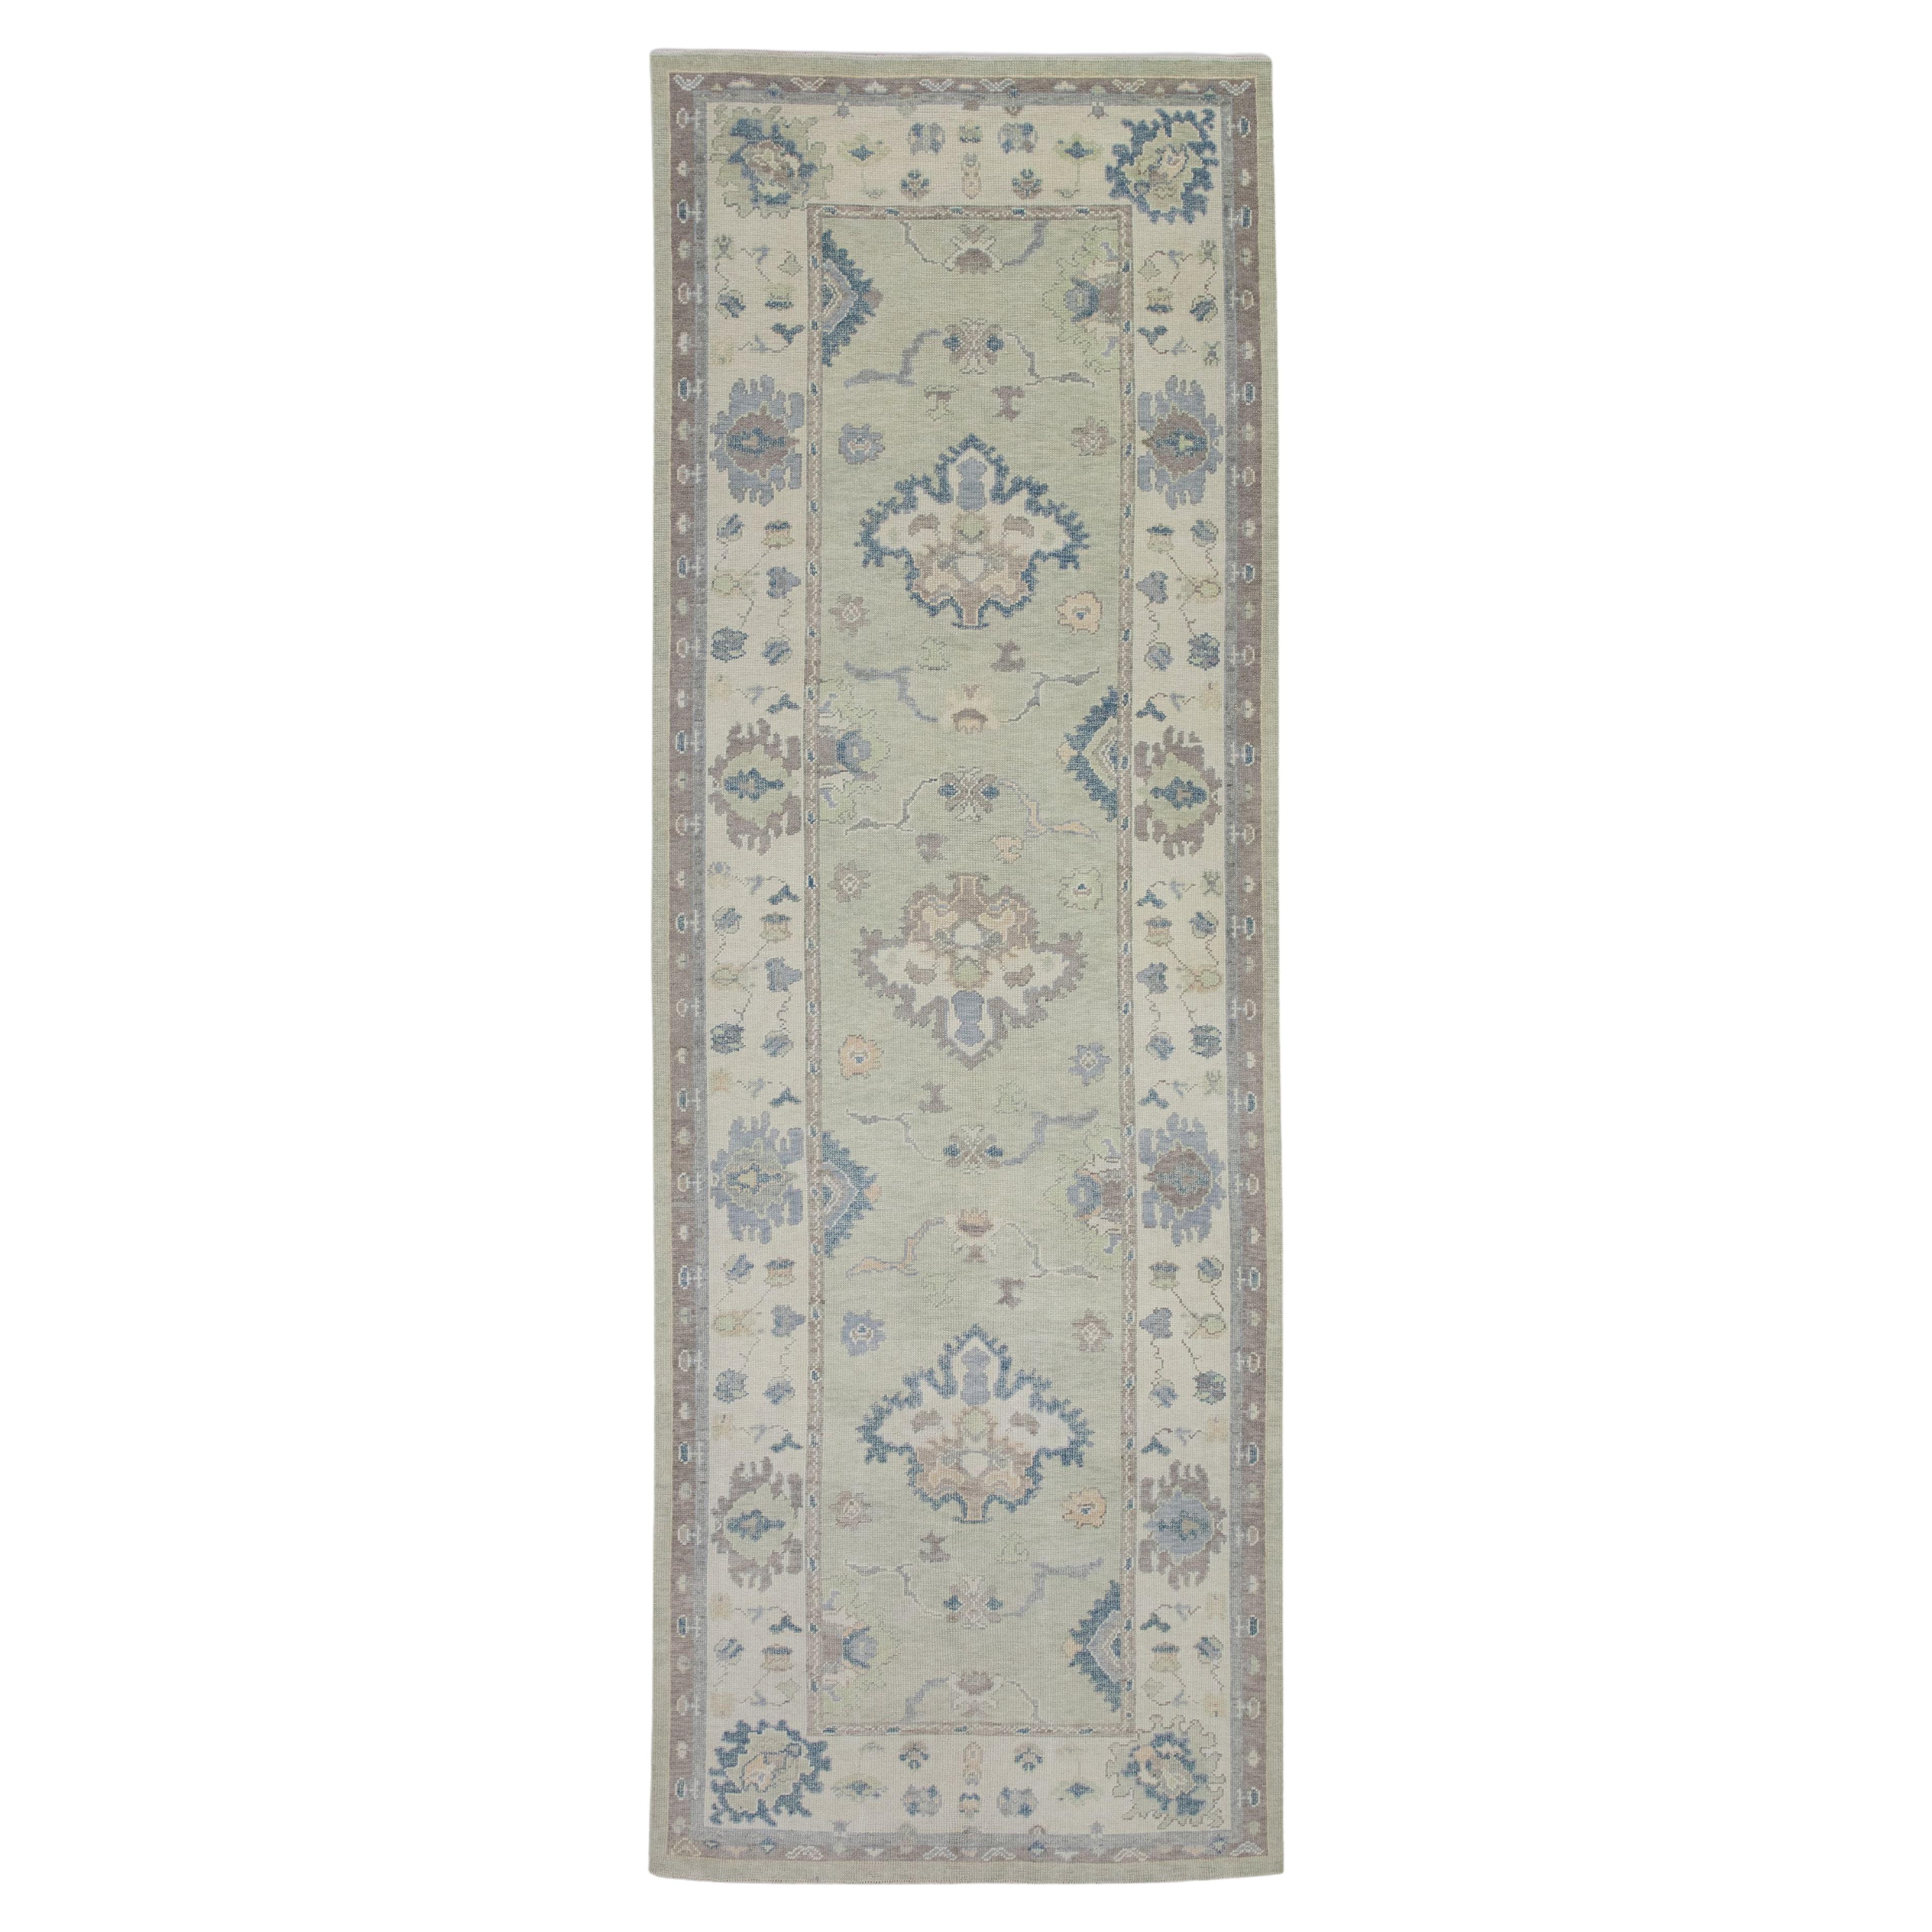 Green & Taupe Floral Design Handwoven Wool Turkish Oushak Runner 4'9" X 13'9" For Sale